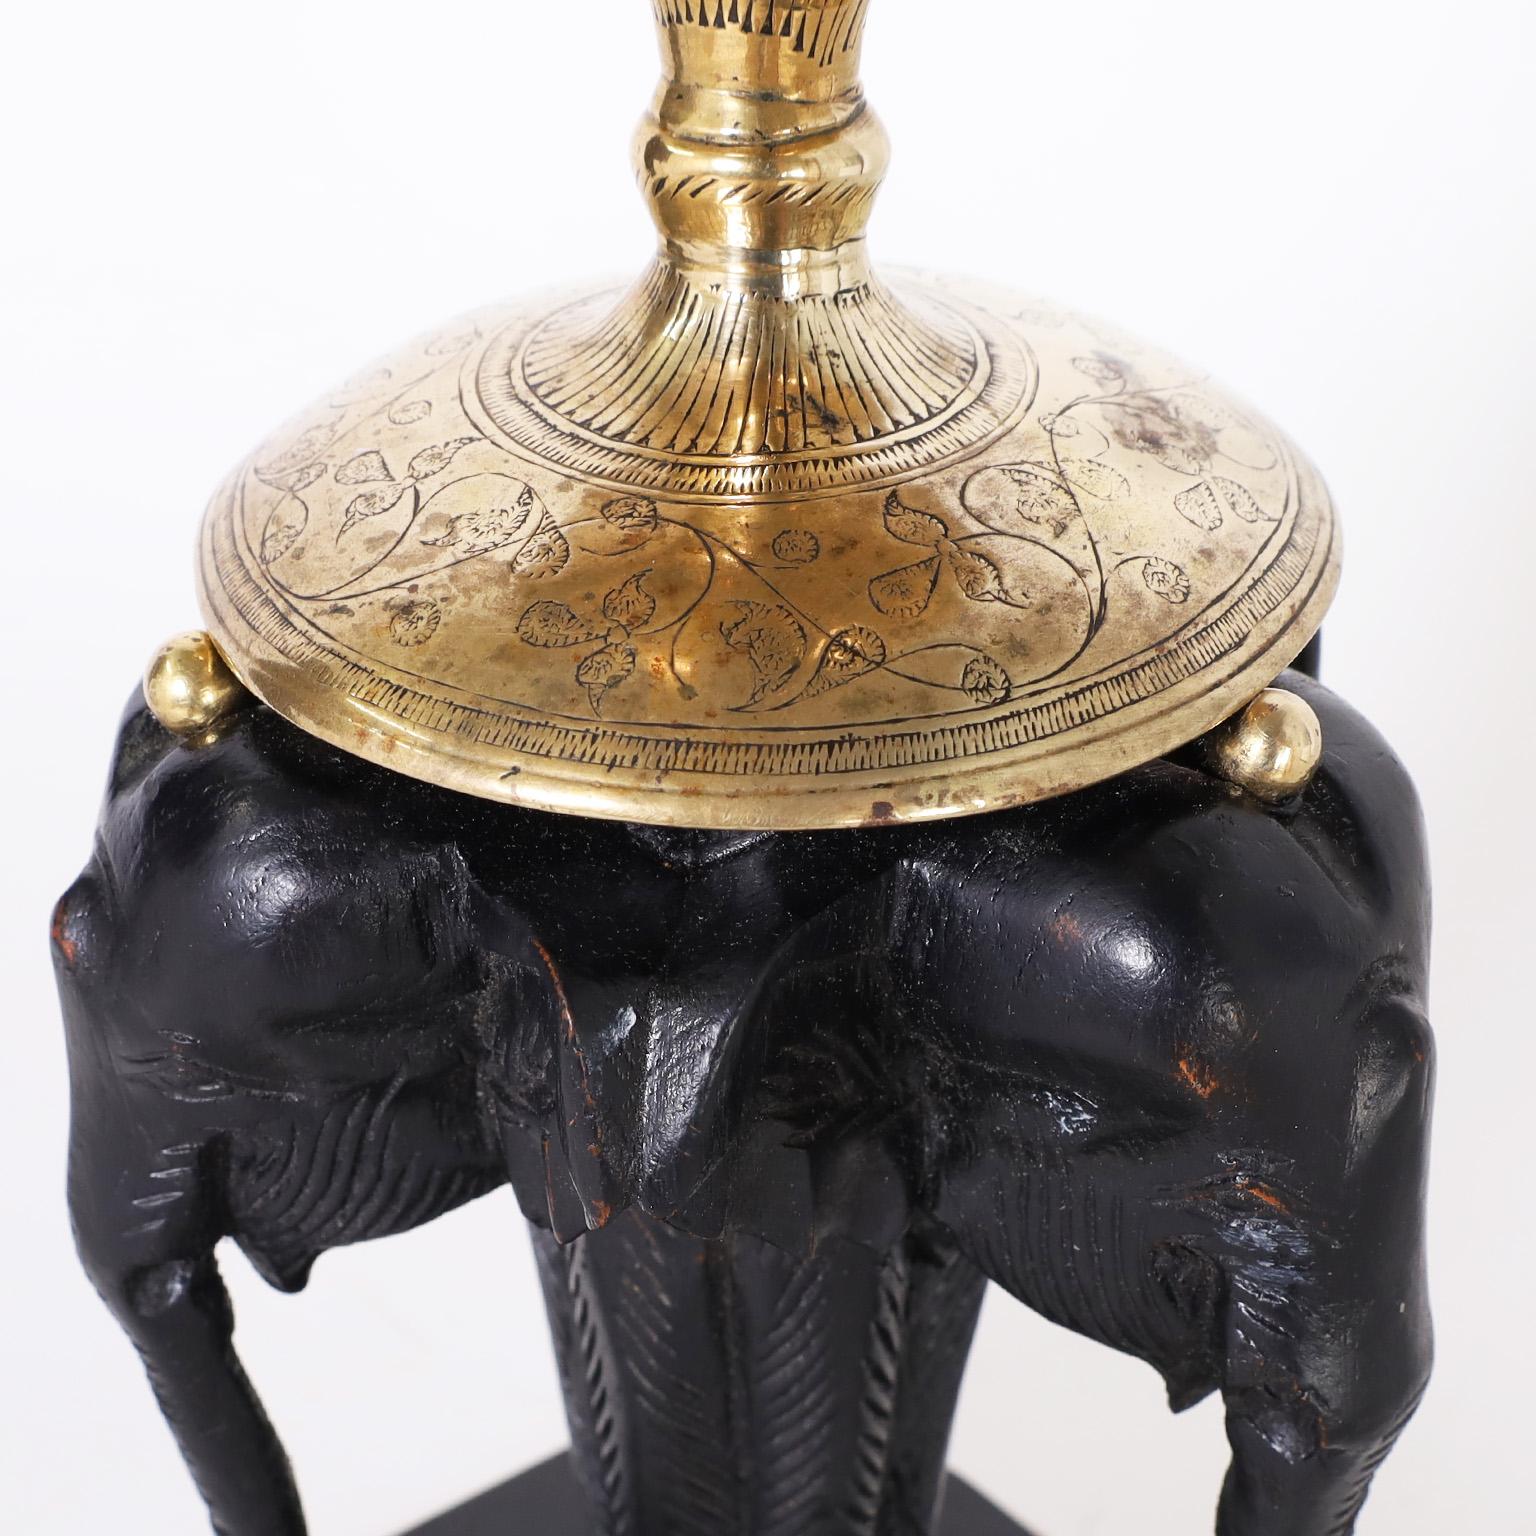 20th Century Pair of British Colonial Style Anglo Indian Brass and Ebony Elephant Vases